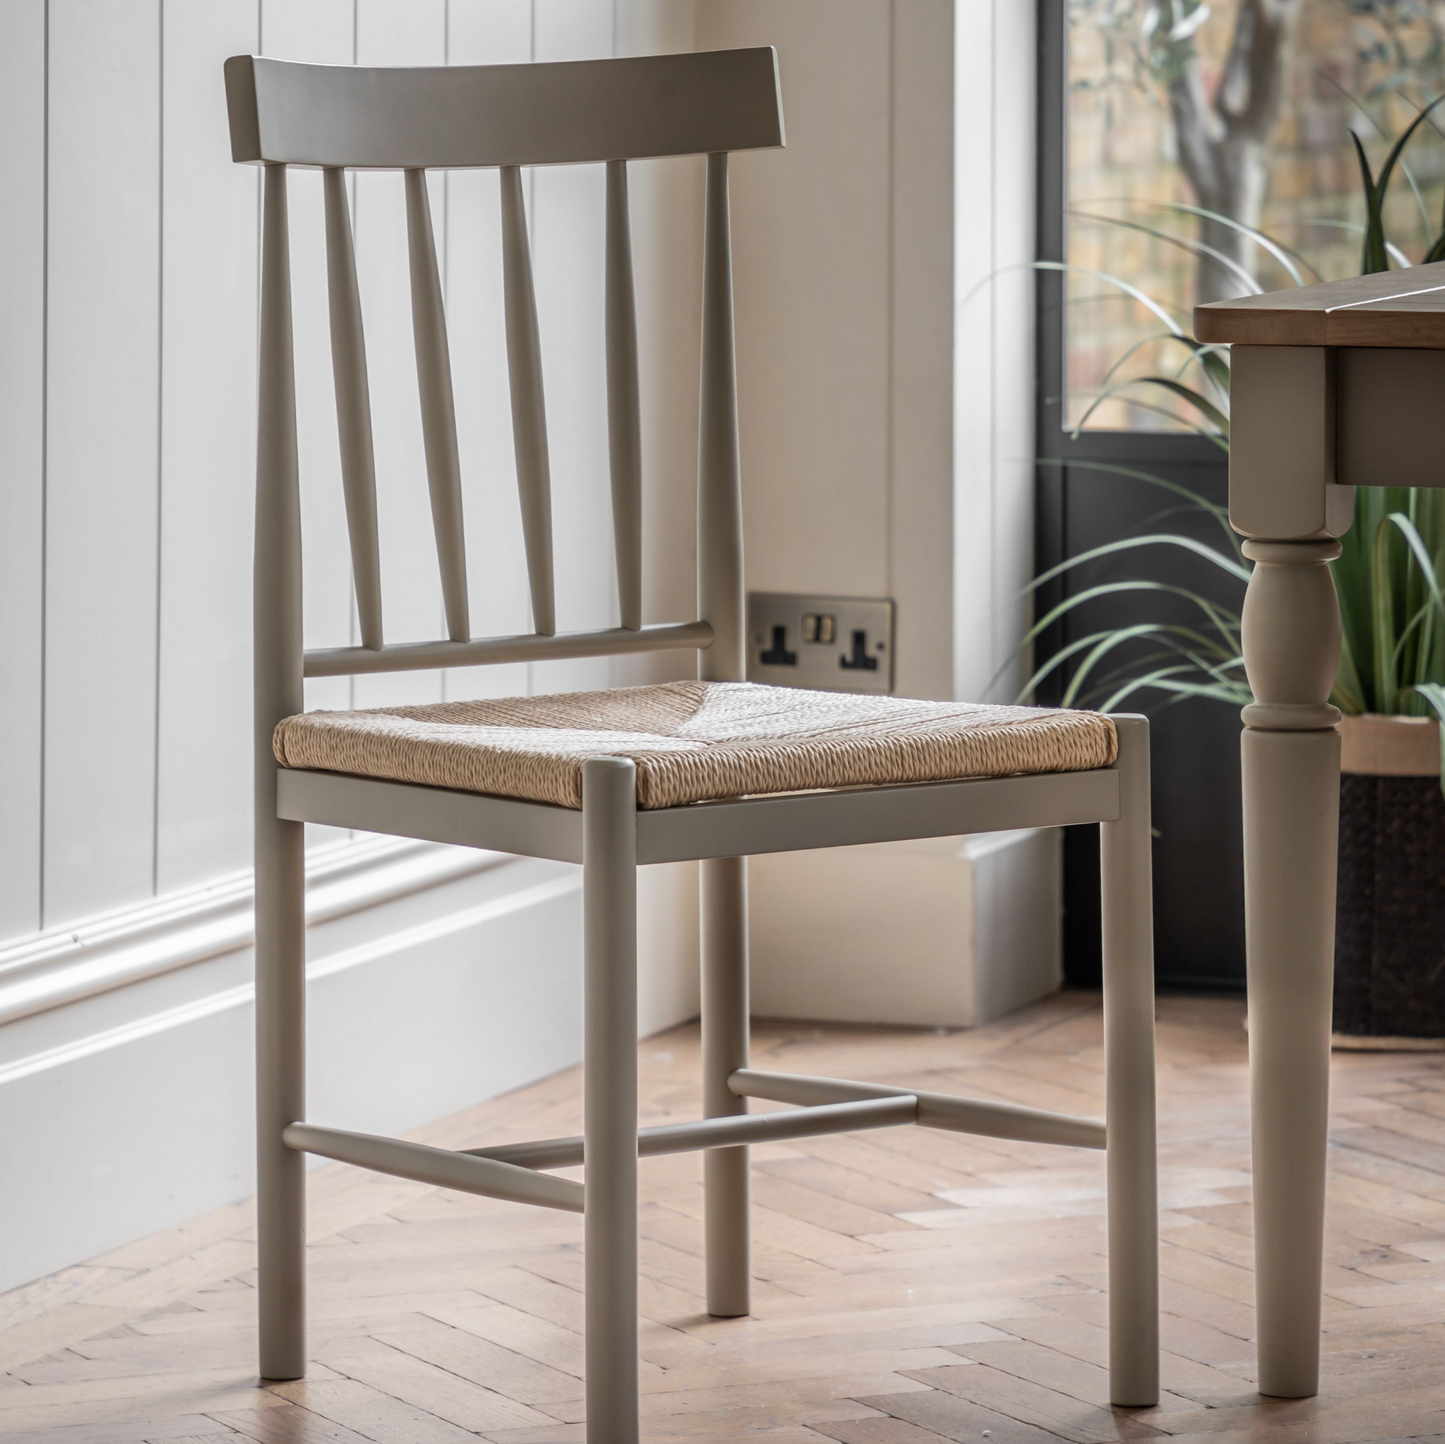 A Buckland Dining Chair 2pk in Prairie from Kikiathome.co.uk next to a wooden table, perfect for interior decor.